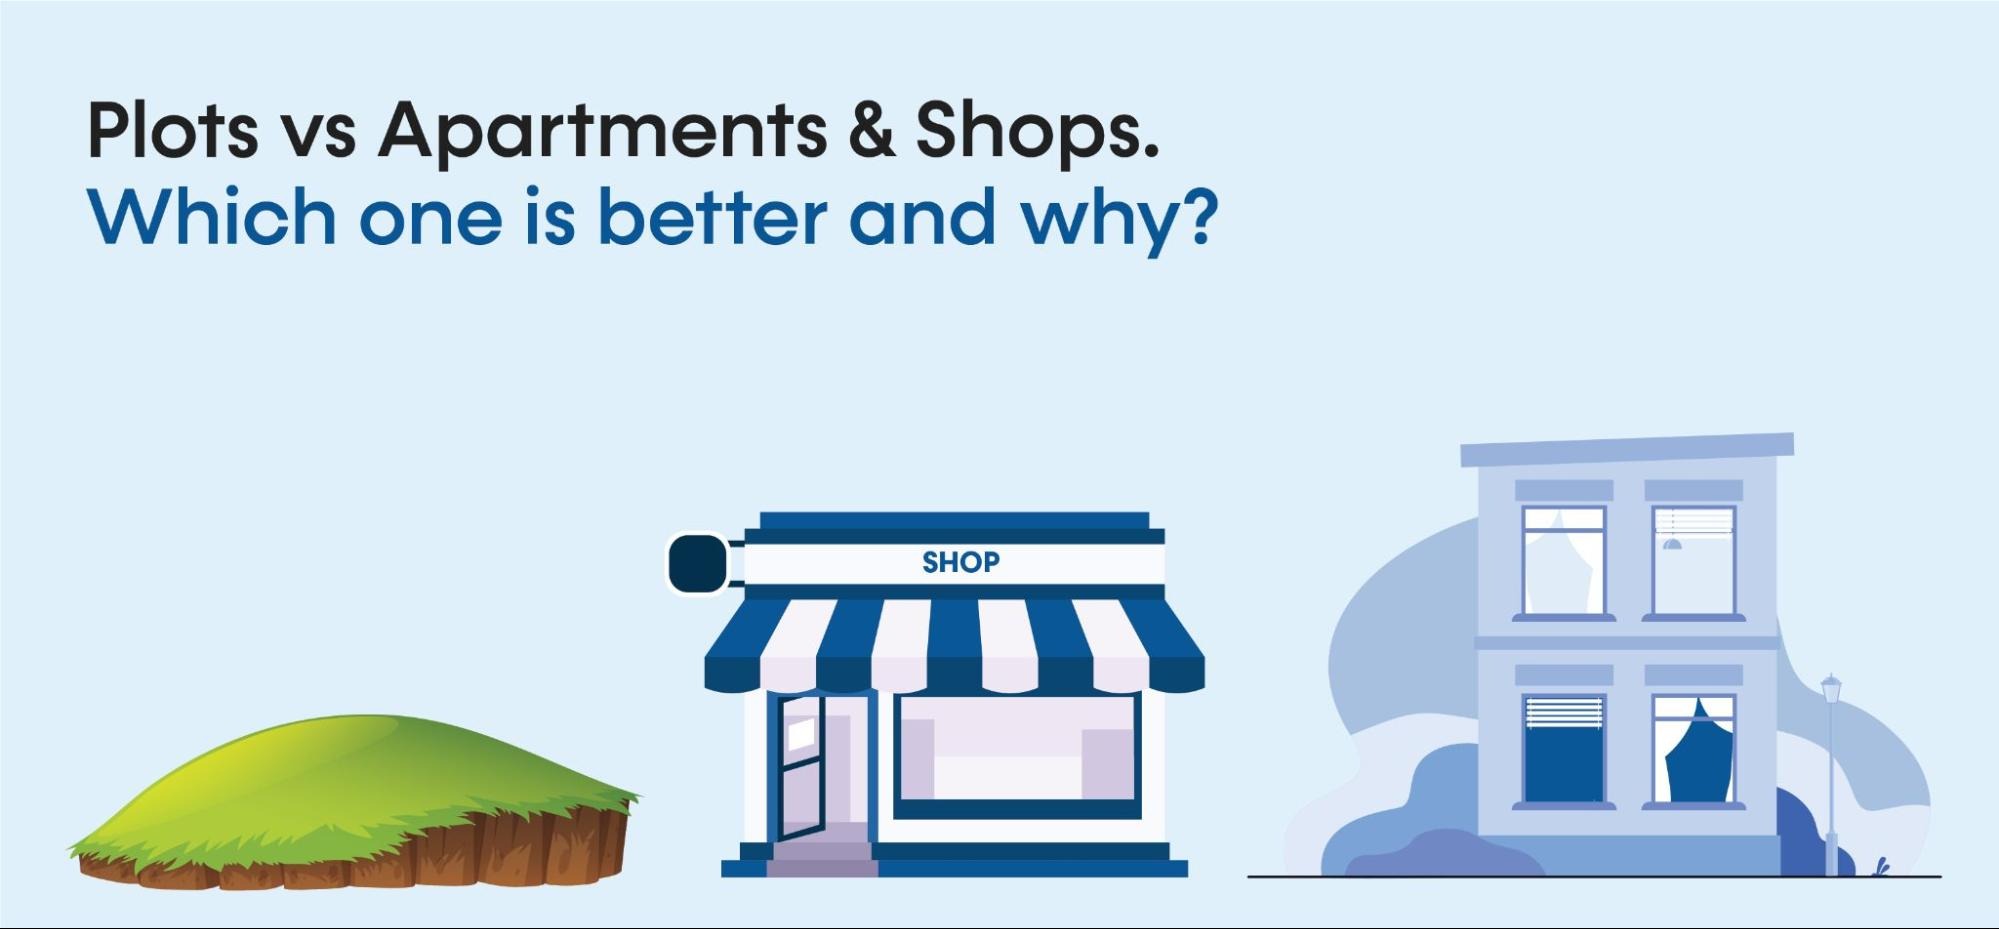 Plots VS Apartments & Shops. Which one is better and why?